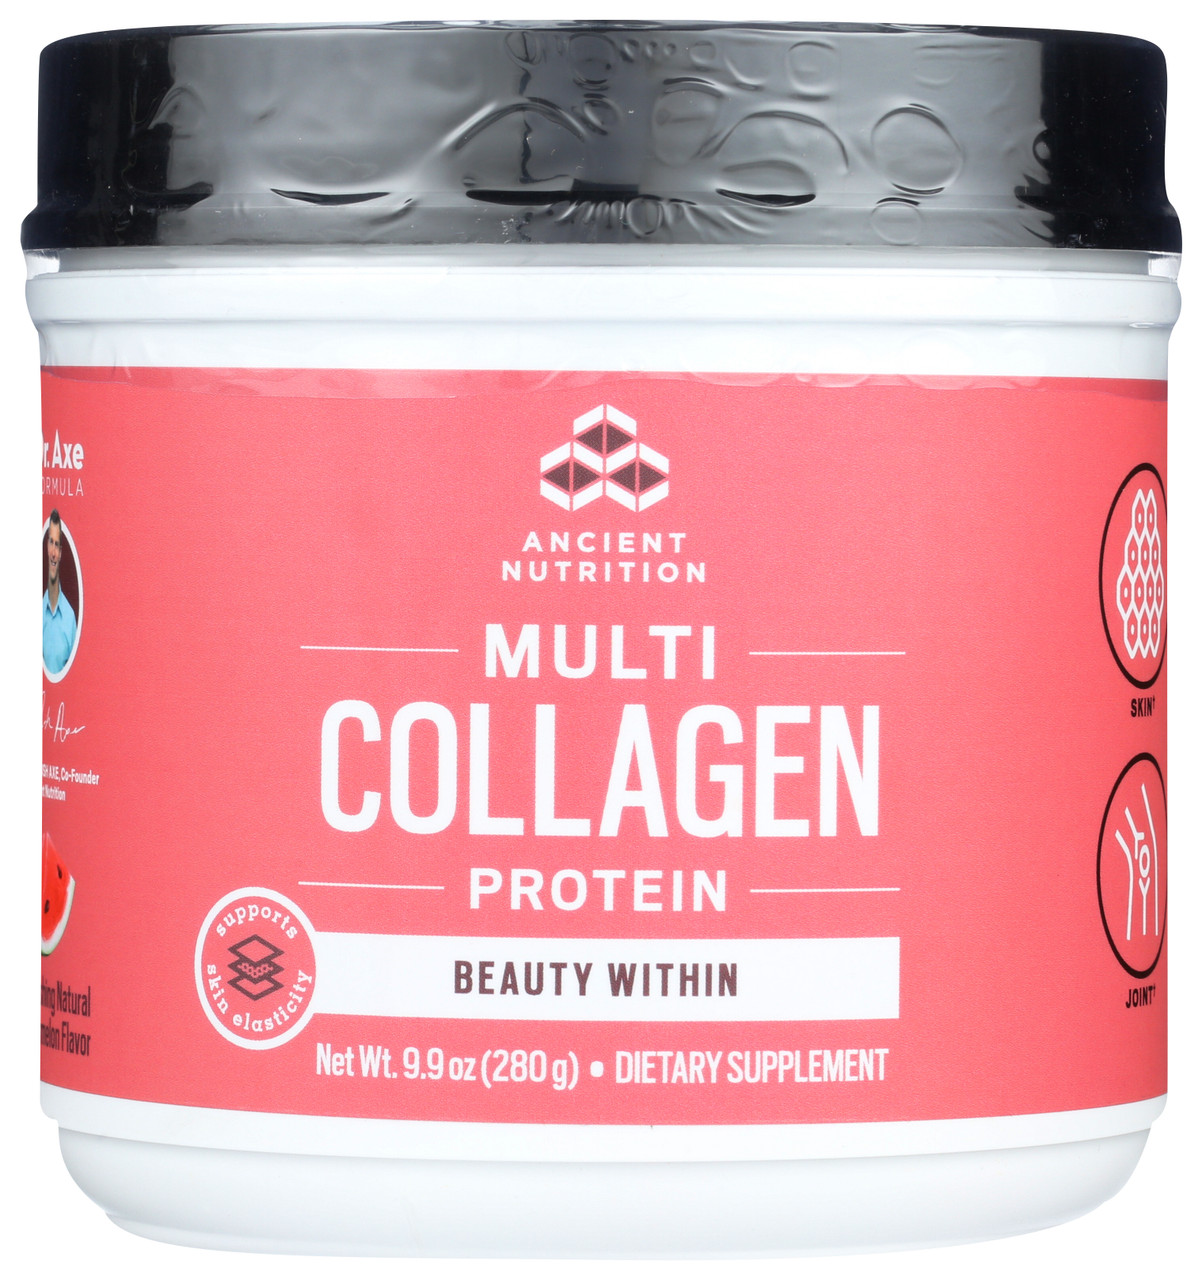 Multi Collagen Protein Beauty Within 9.9oz